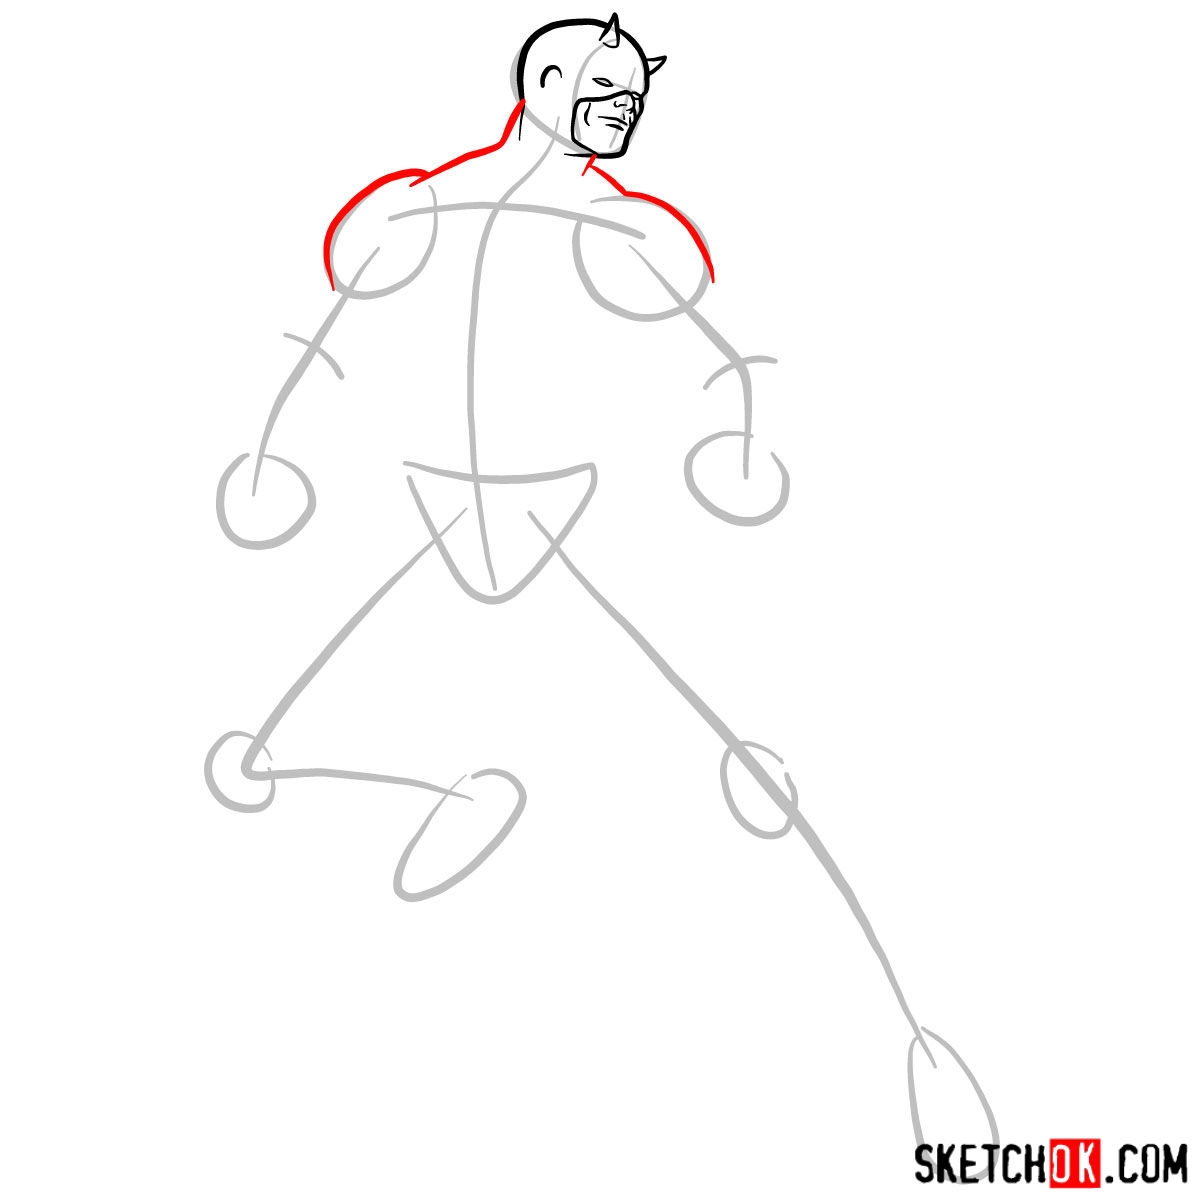 How to draw Daredevil from Marvel - step 04